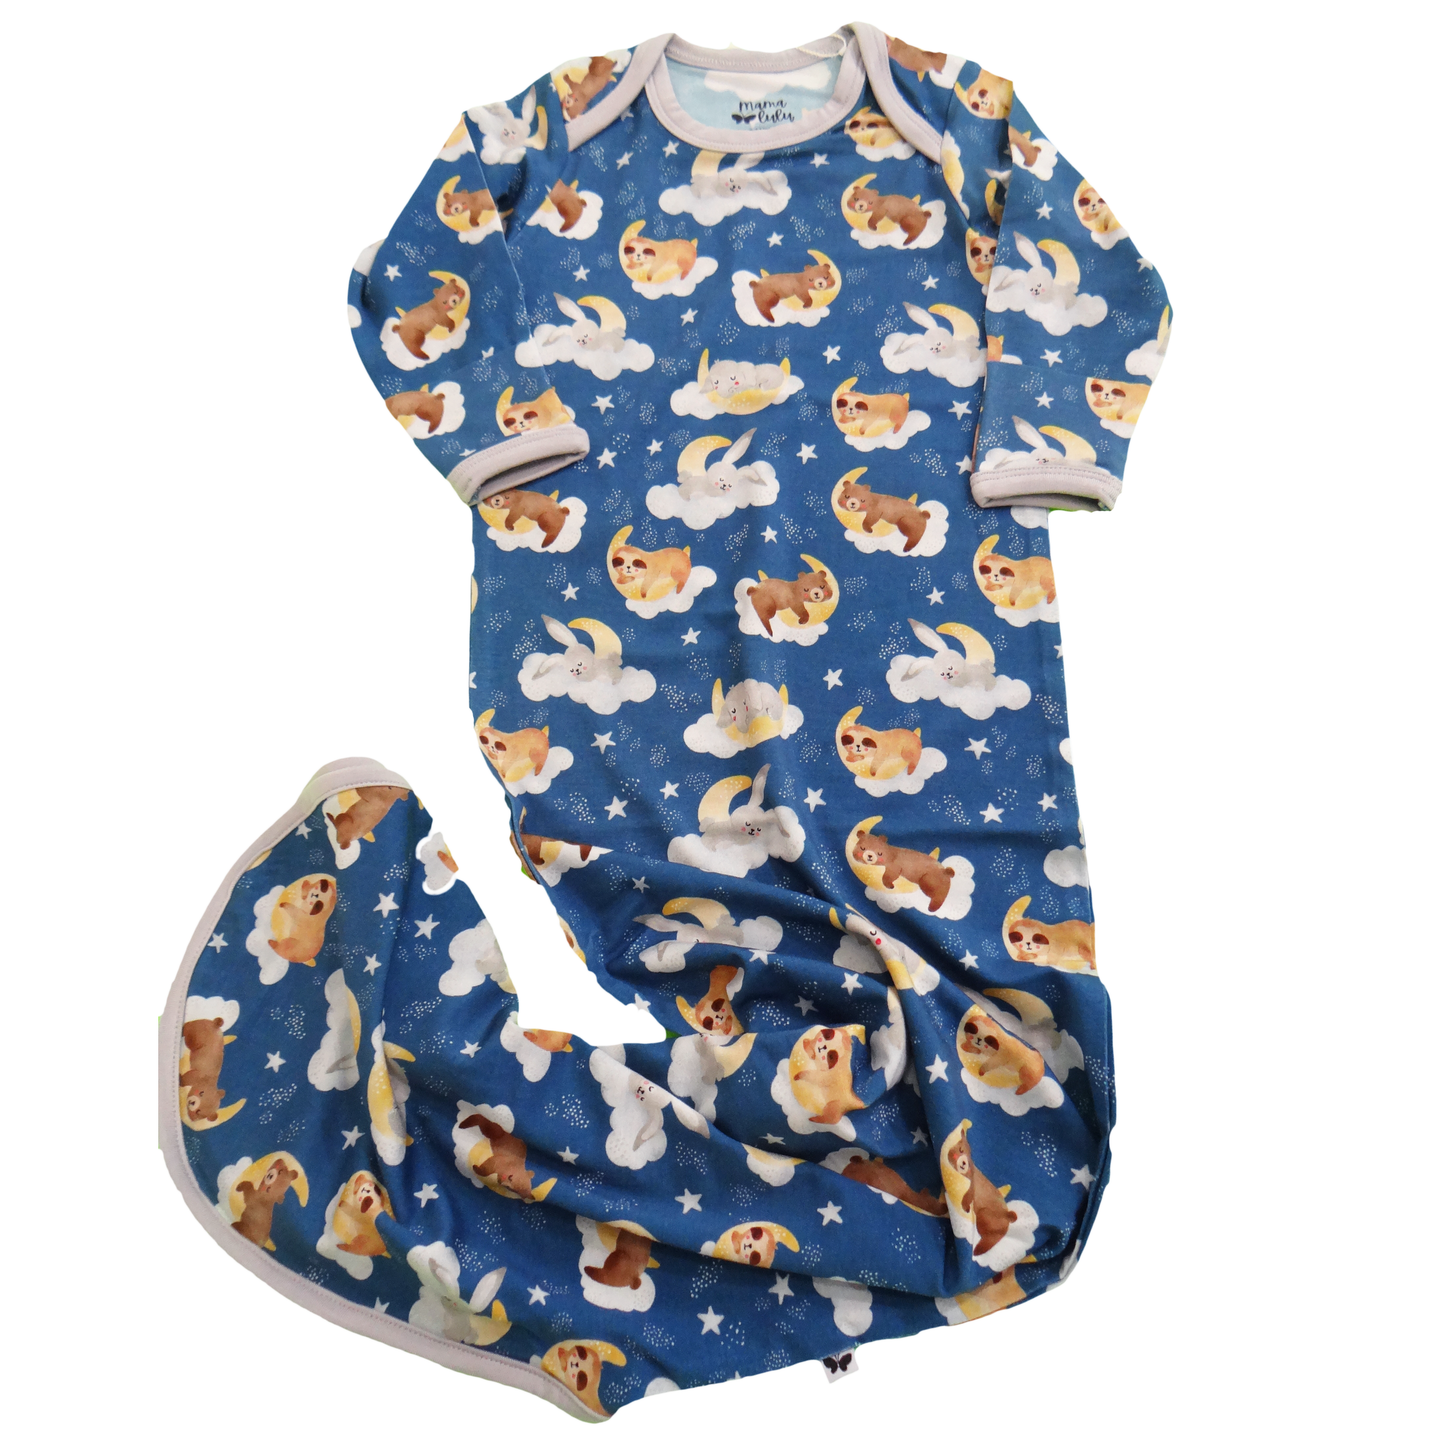 Bedtime Buddies Infant Gown